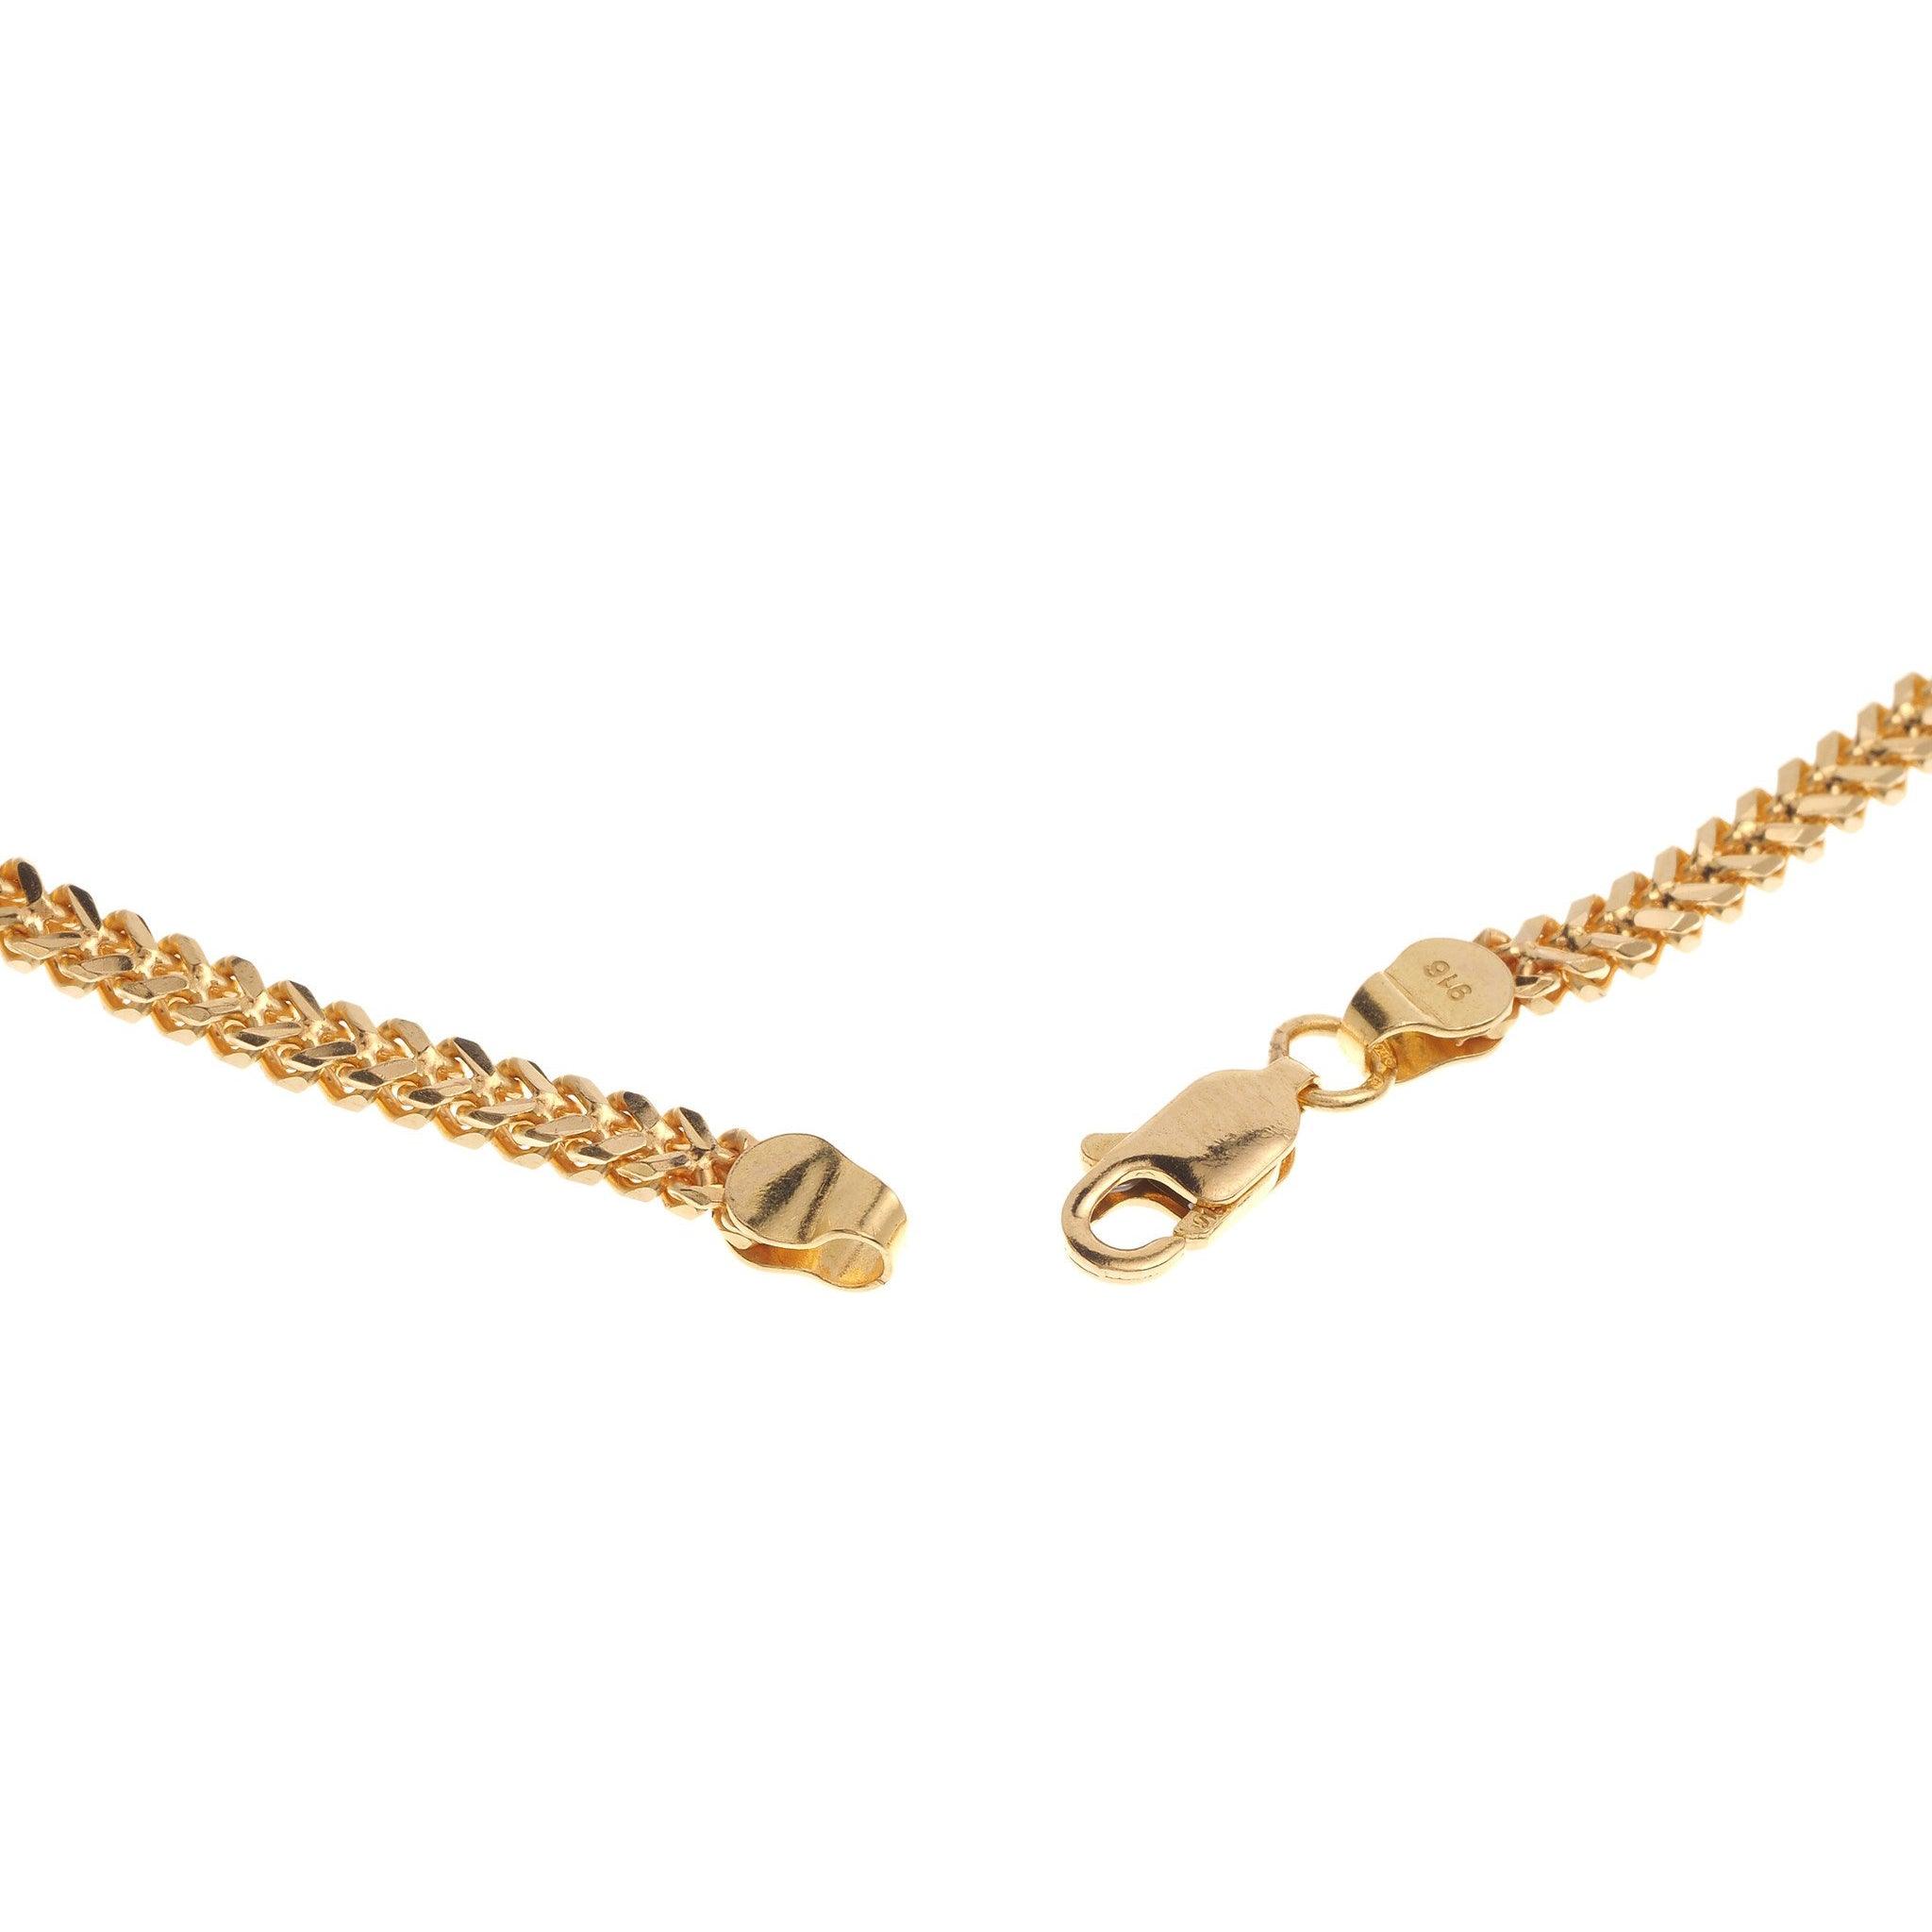 22ct Gold Foxtail Chain with a lobster clasp C-3462 - Minar Jewellers